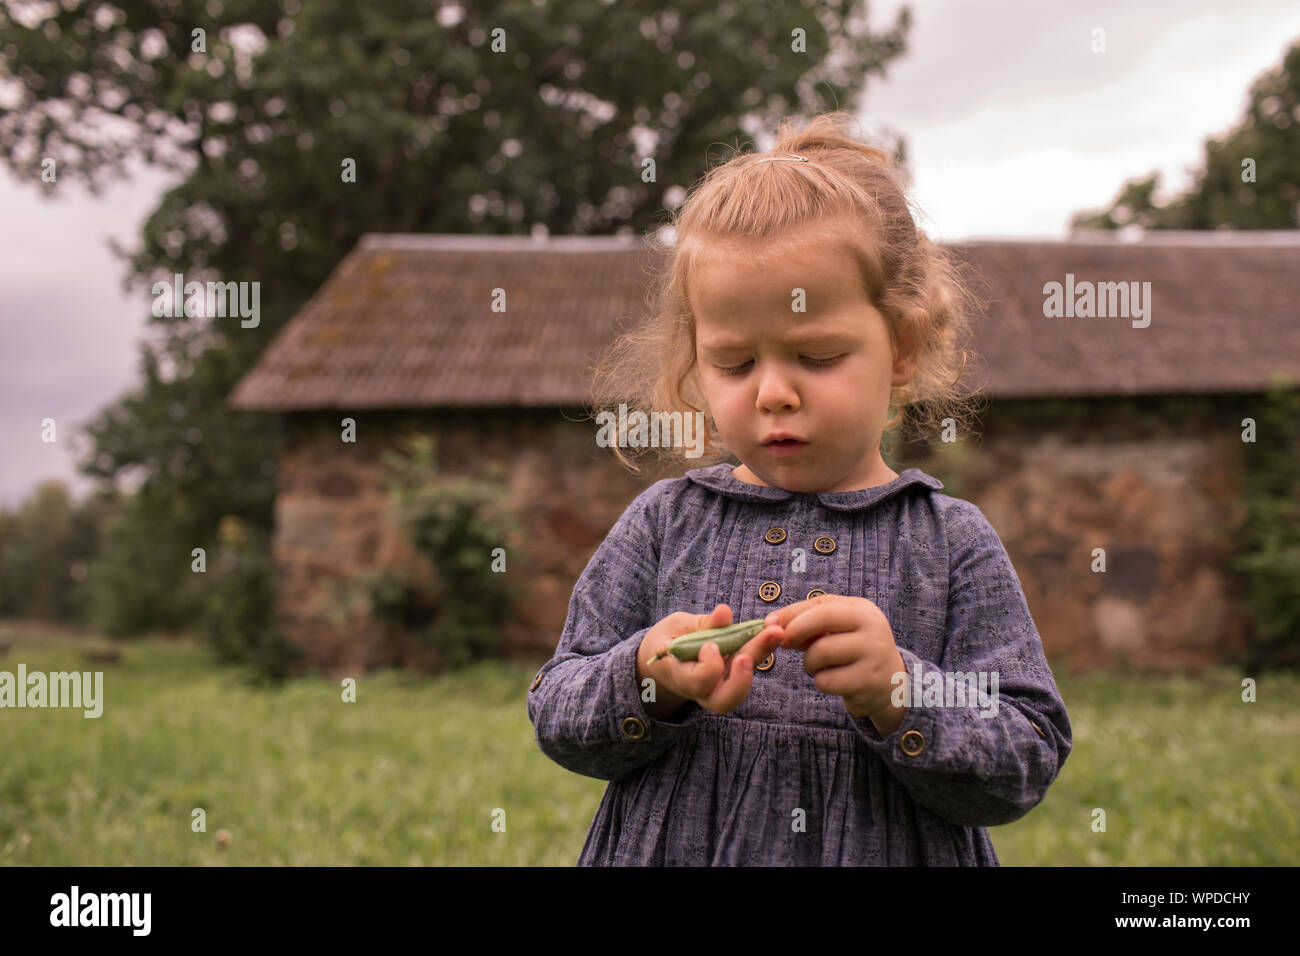 Little, adorable child girl peeling green pea, from organic bio countryside farm garden, with fresh healthy food Stock Photo